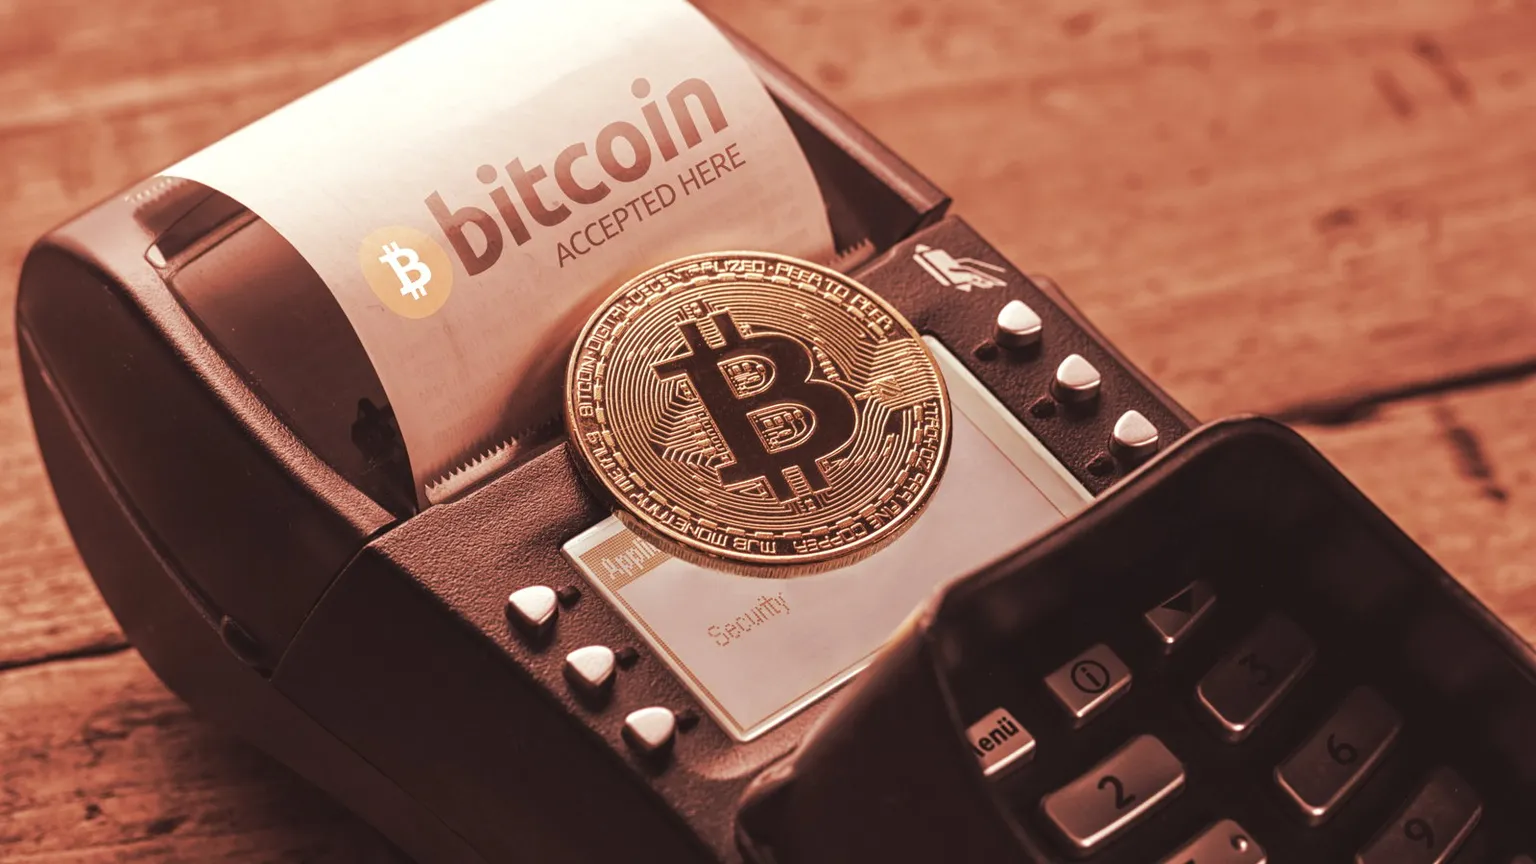 Bitcoin payments. Image: Shutterstock